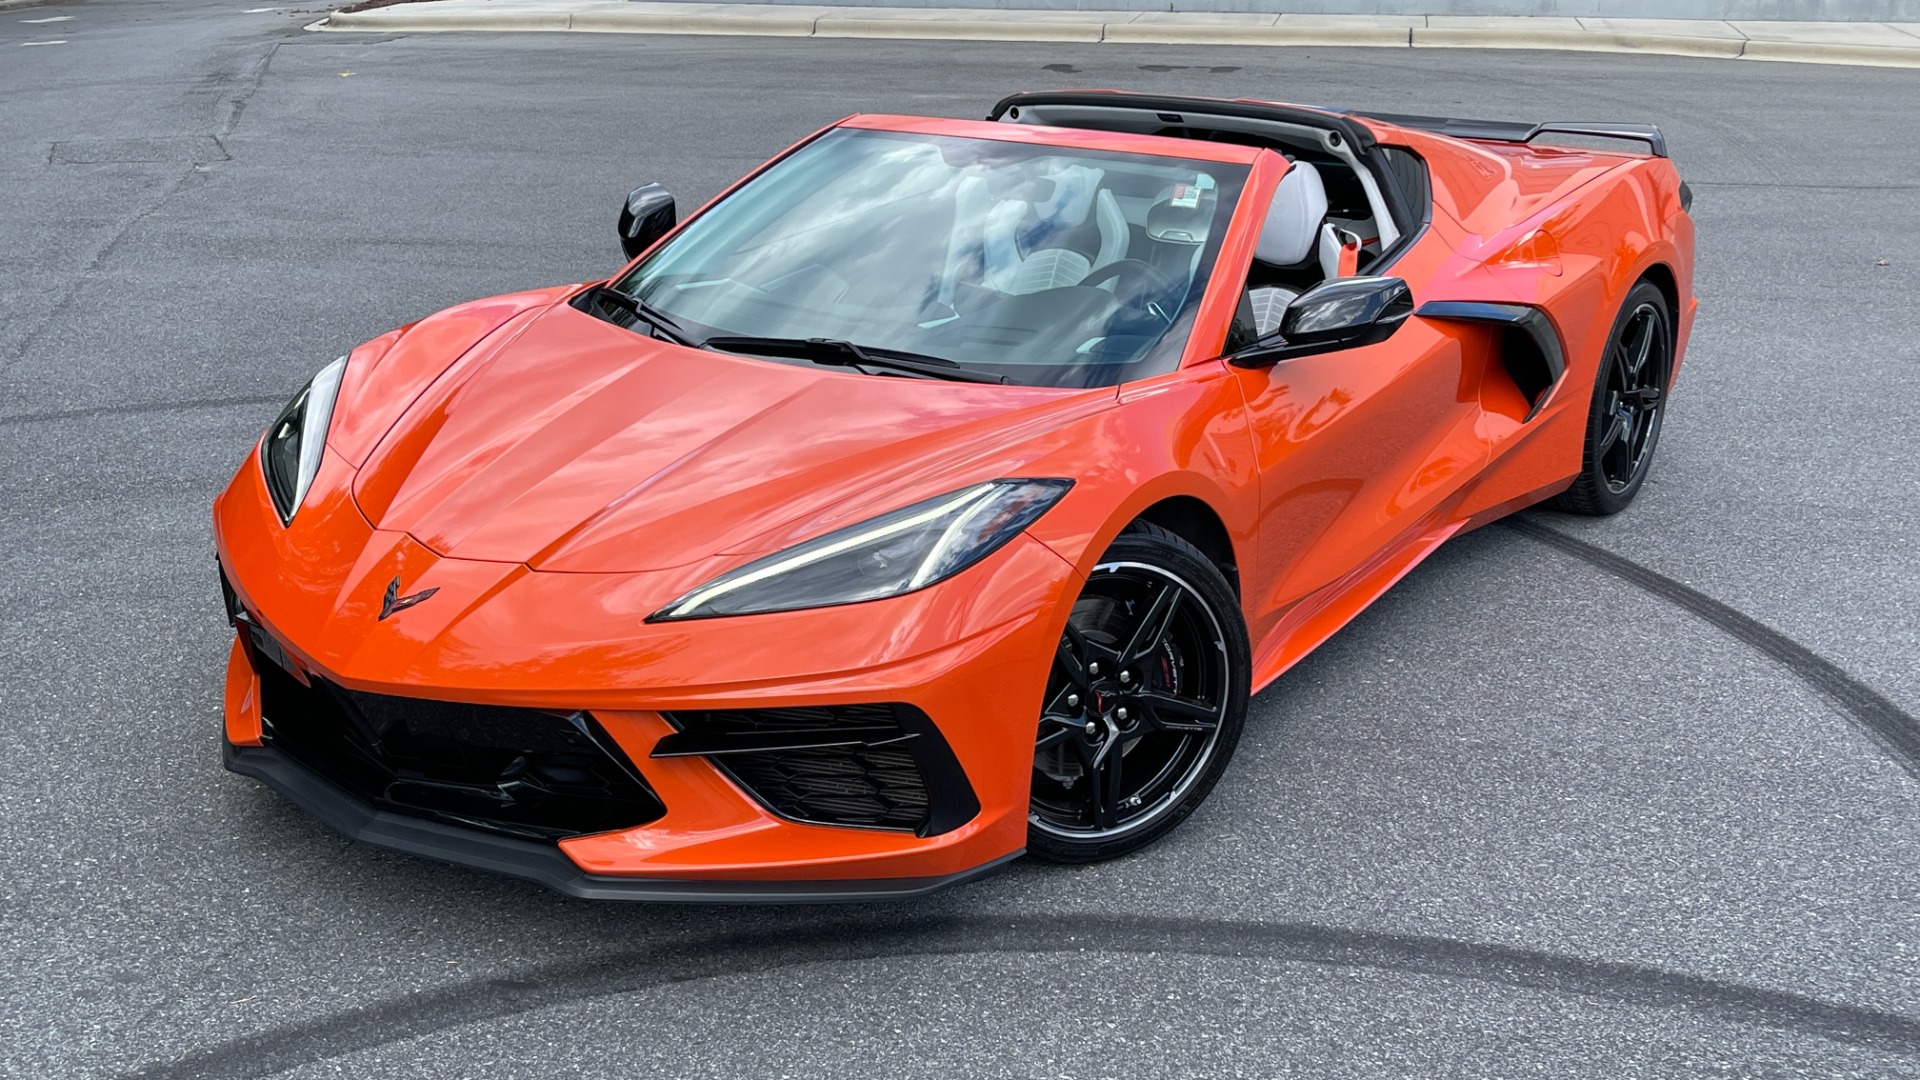 Used 2020 Chevrolet Corvette 3LT / Z51 / PERFORMANCE EXHAUST / FRONT LIFT / Z51 BRAKES / CARBON FIBER AC for sale $92,595 at Formula Imports in Charlotte NC 28227 3